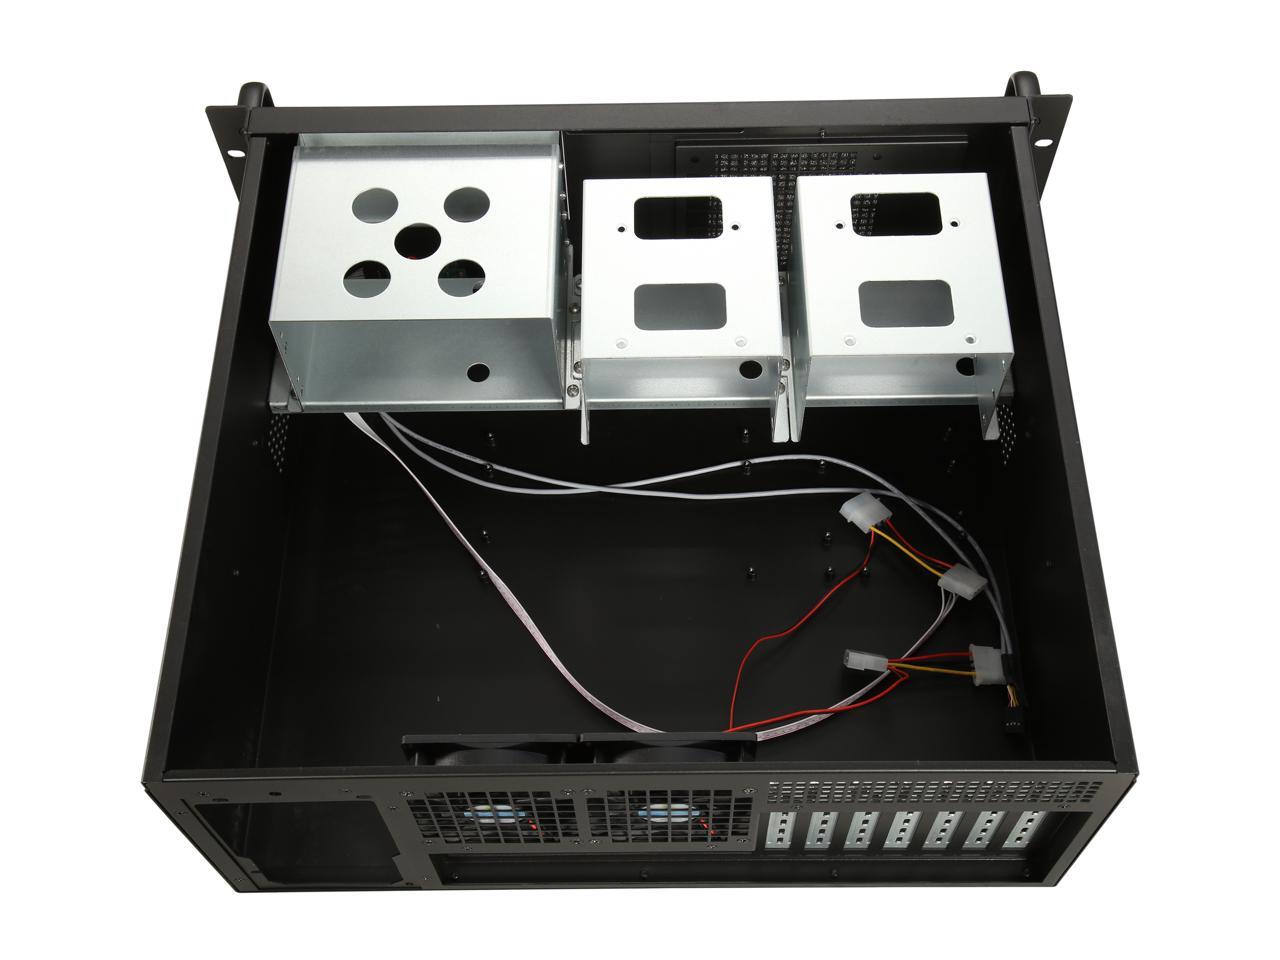 Rosewill RSV-R4100 - 4U Rackmount Server Case / Chassis - 8 Internal Bays, 2 Included Cooling Fans